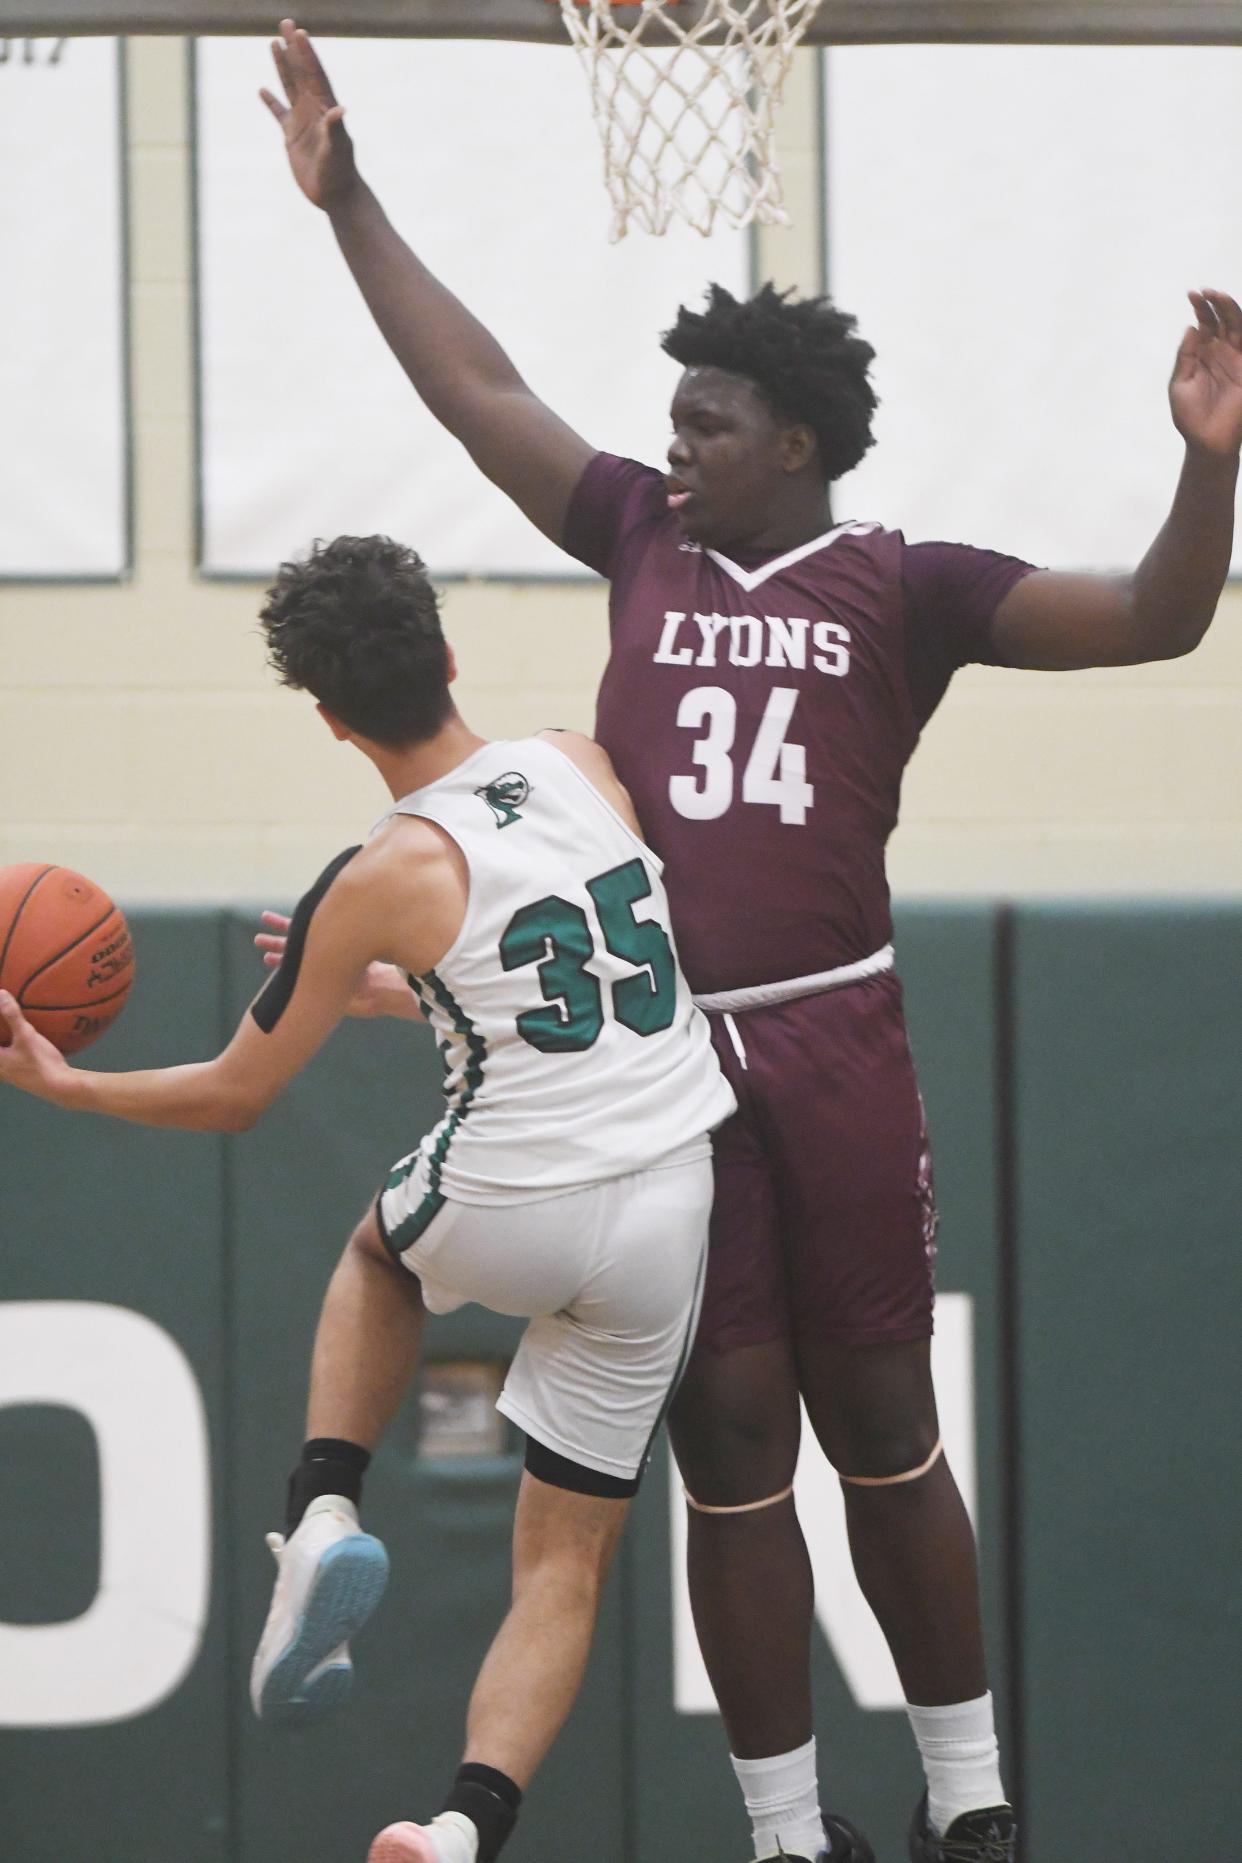 Jamire Johnson of Lyons defends as Jon Suro of Pembroke drives to the basket in the first quarter.